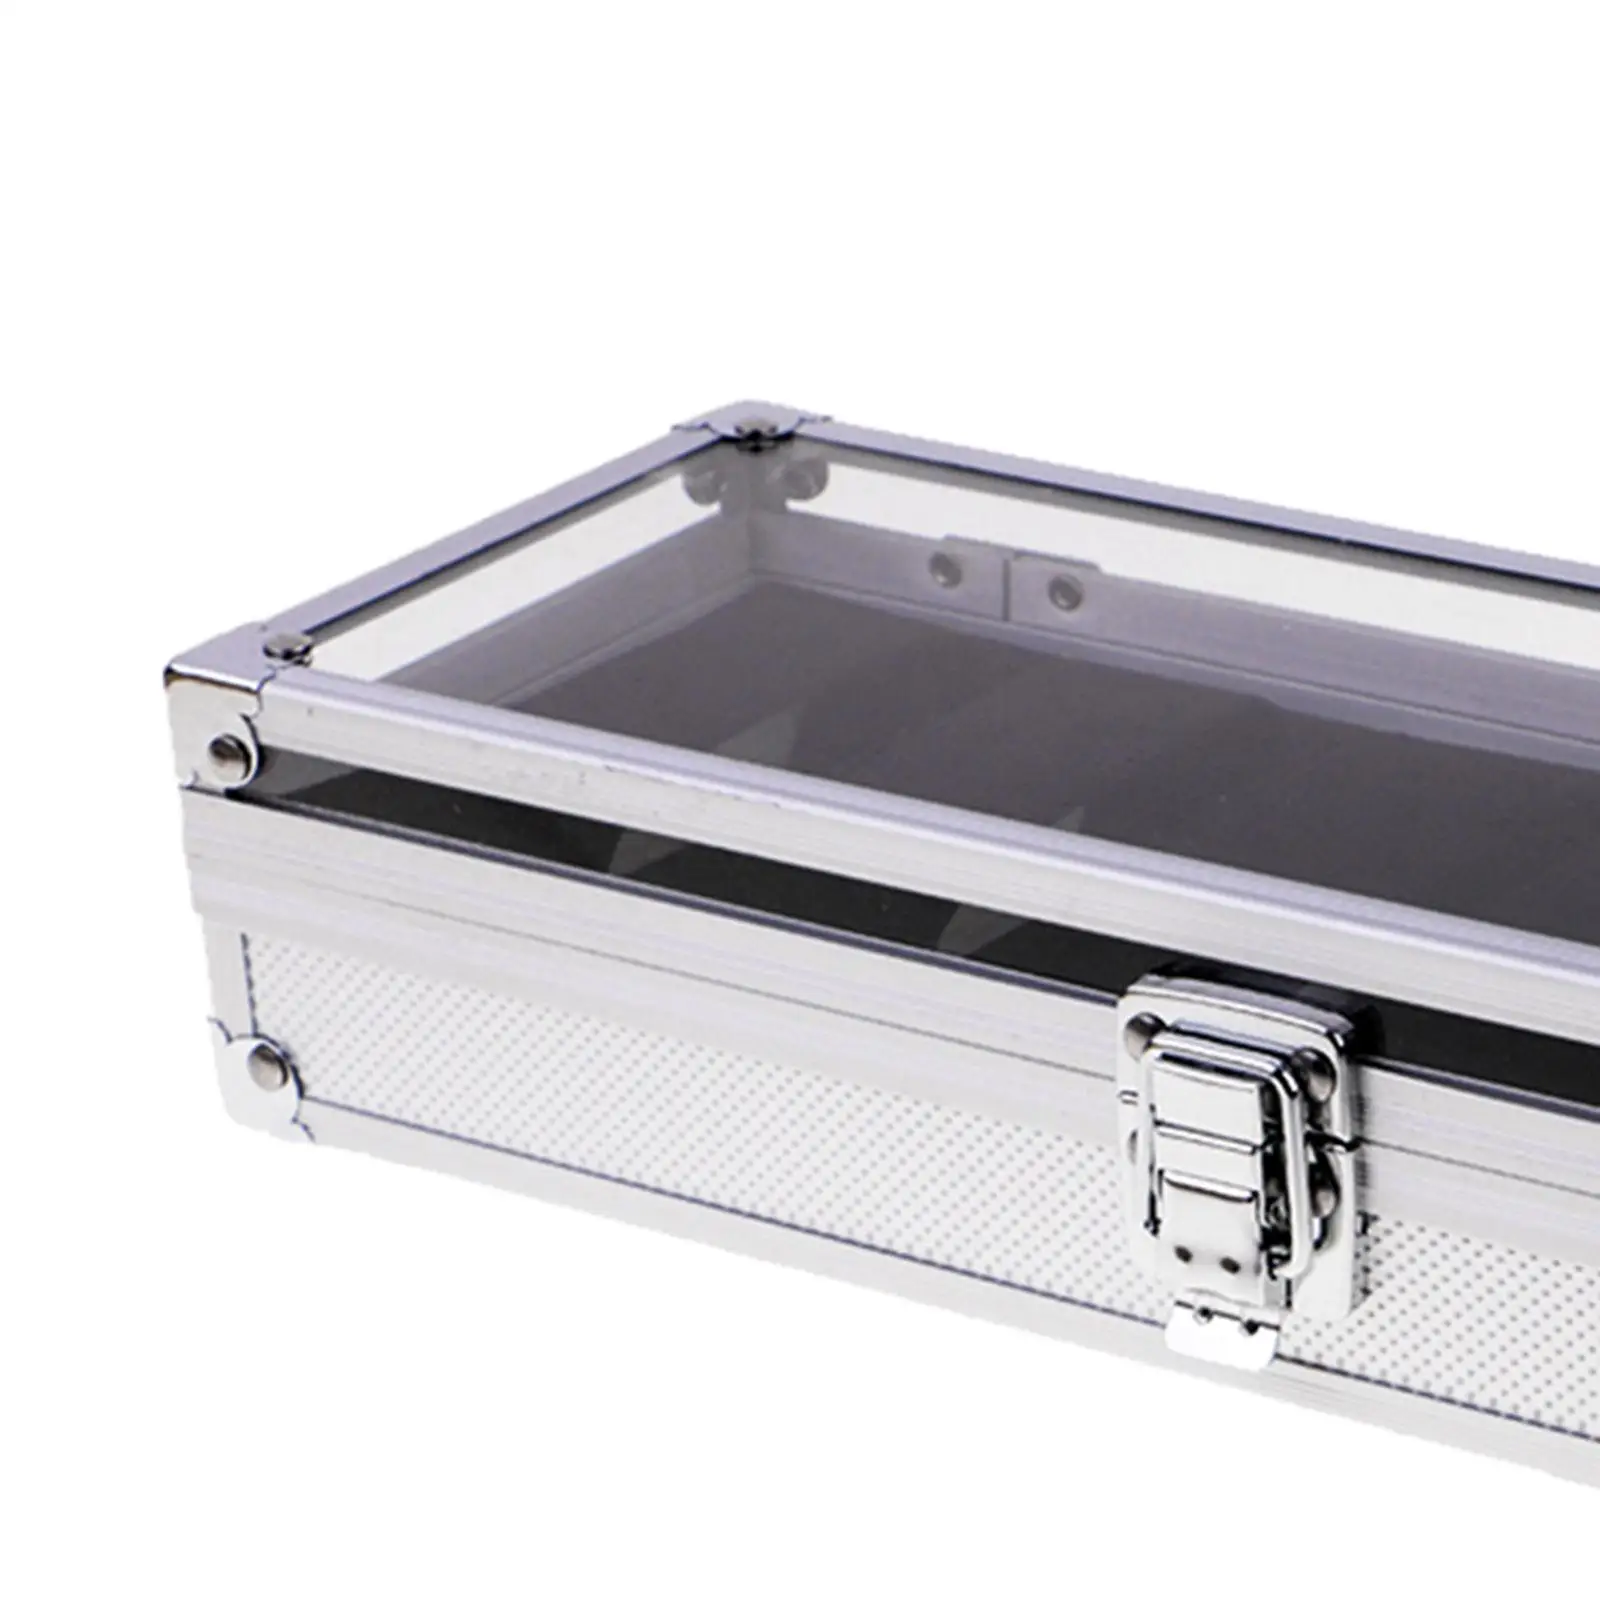 Watch Storage Box 6 Wide Slots Waterproof Elegant Men and Women Container Watches Jewelry Display Portable Jewelry Display Case